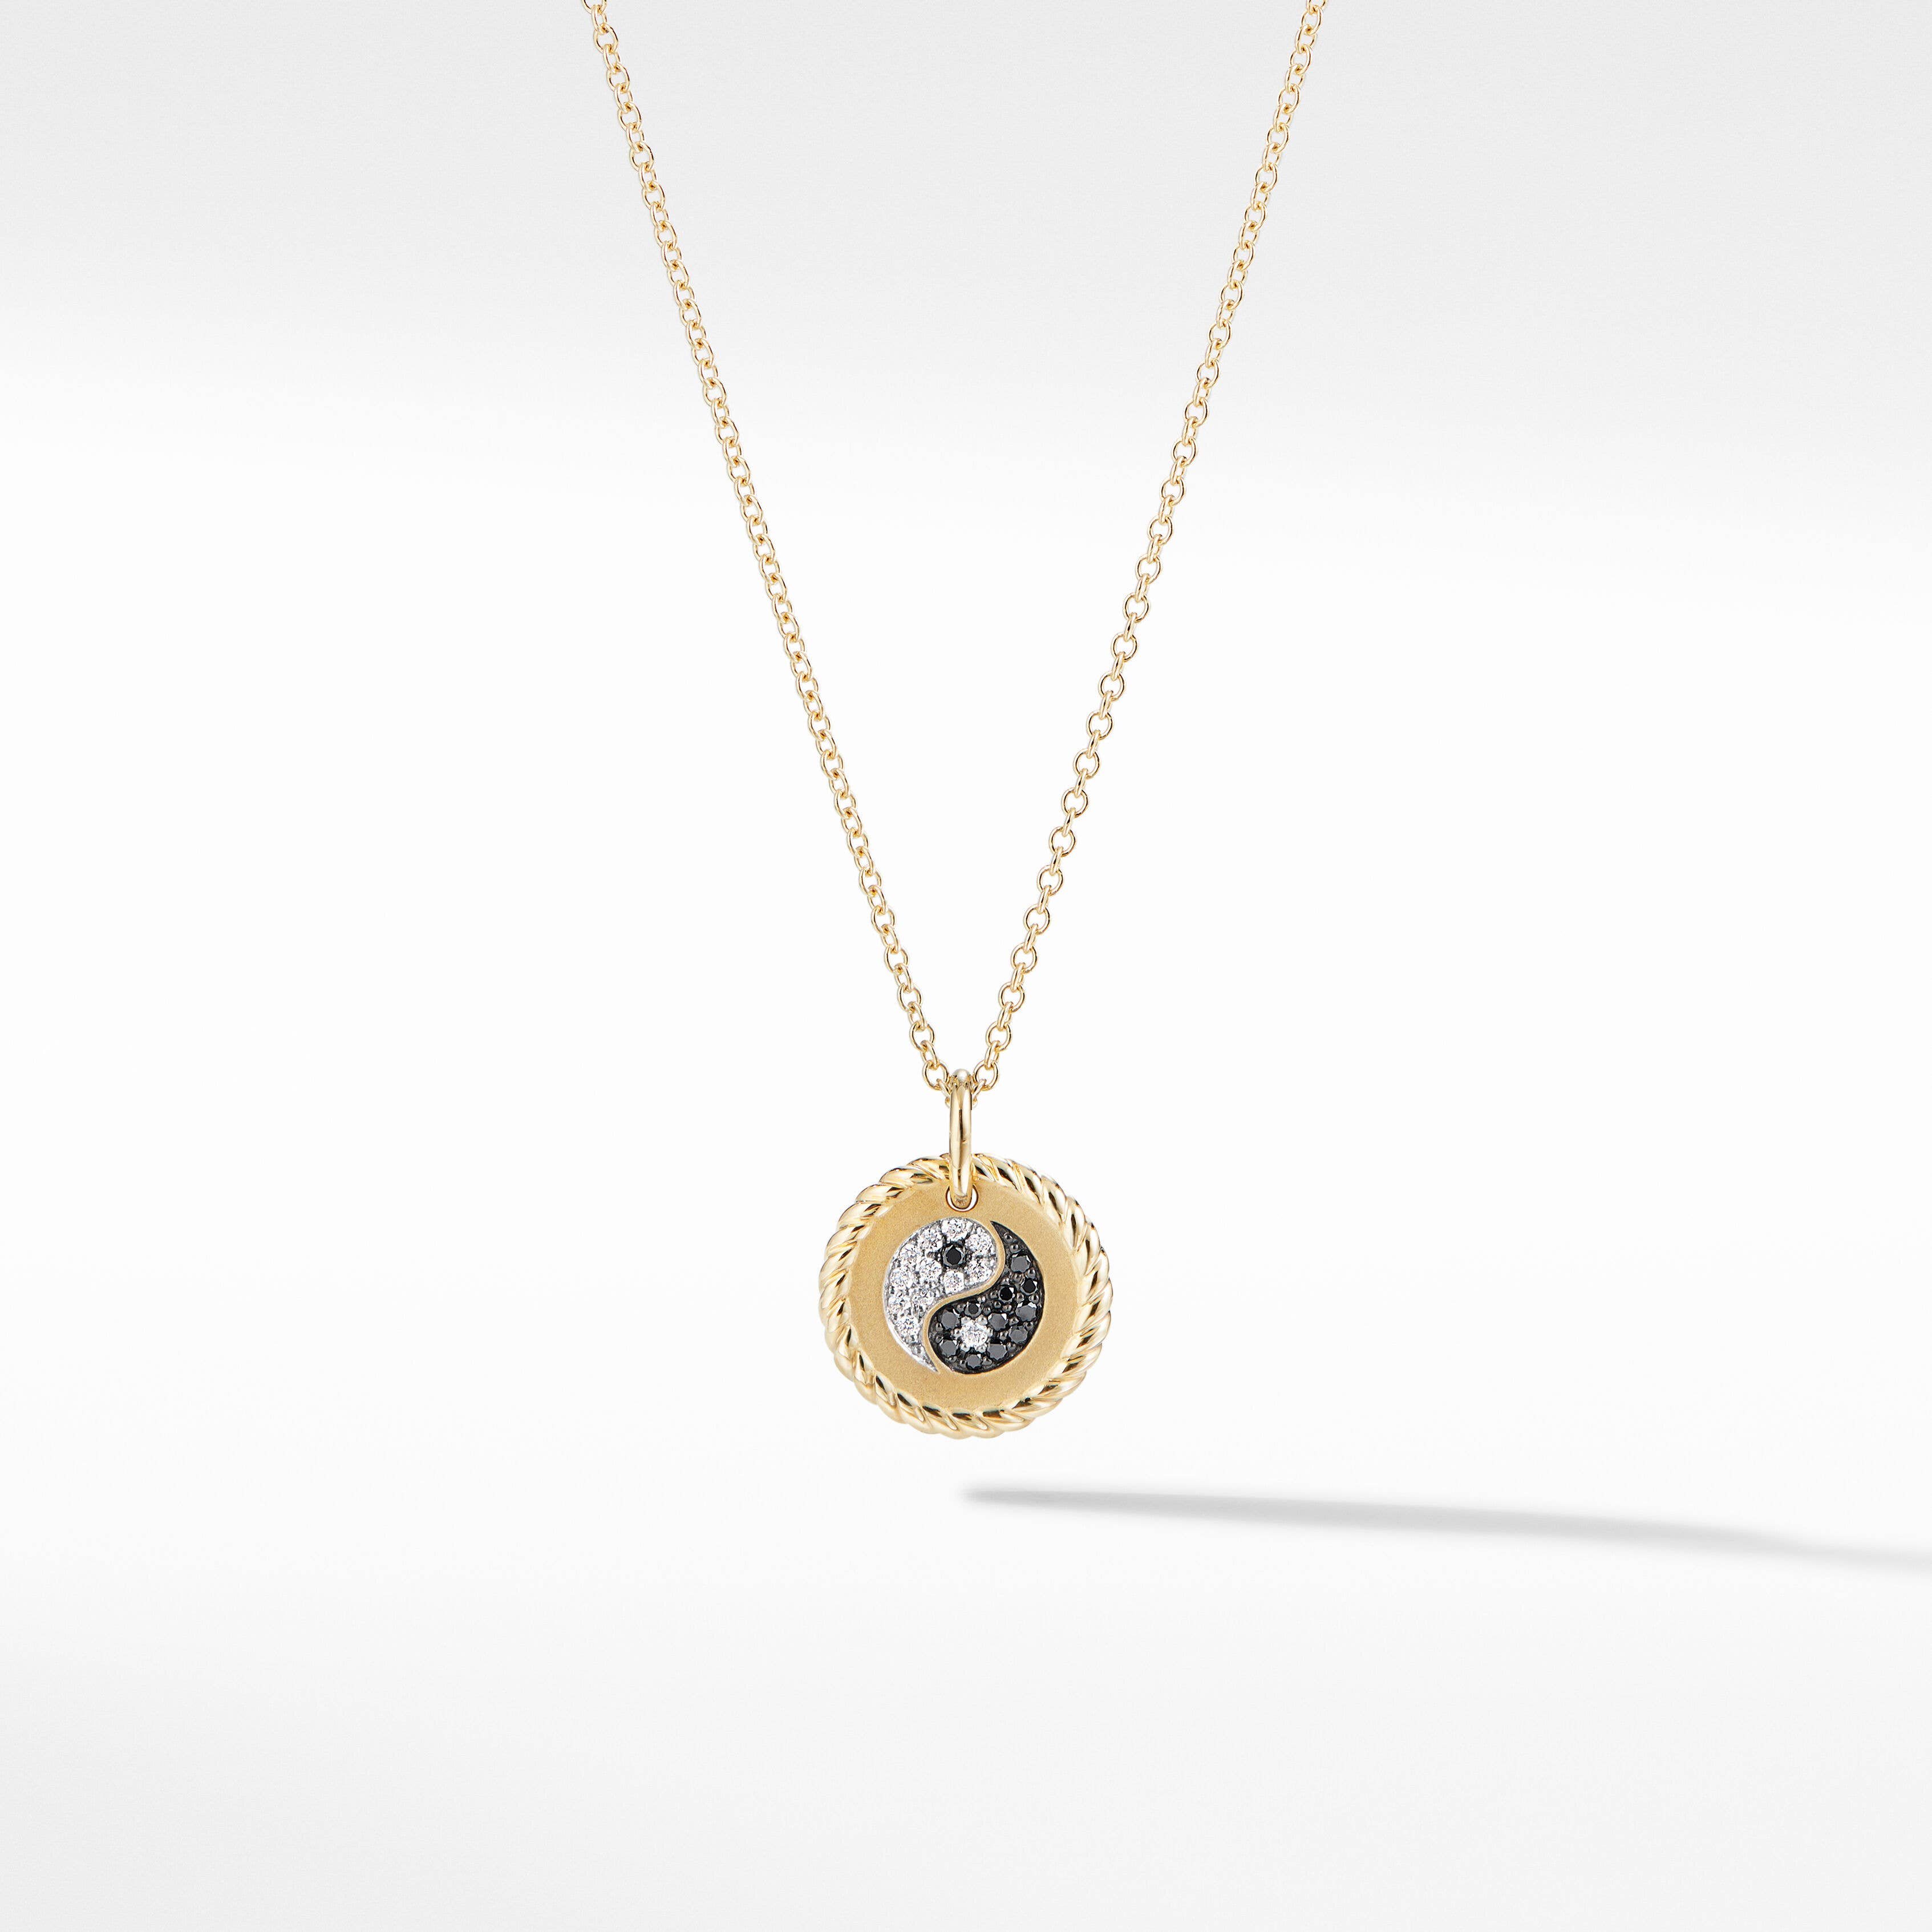 Cable Collectibles® Yin Yang Pendant Necklace in 18K Yellow Gold with Pavé Diamonds